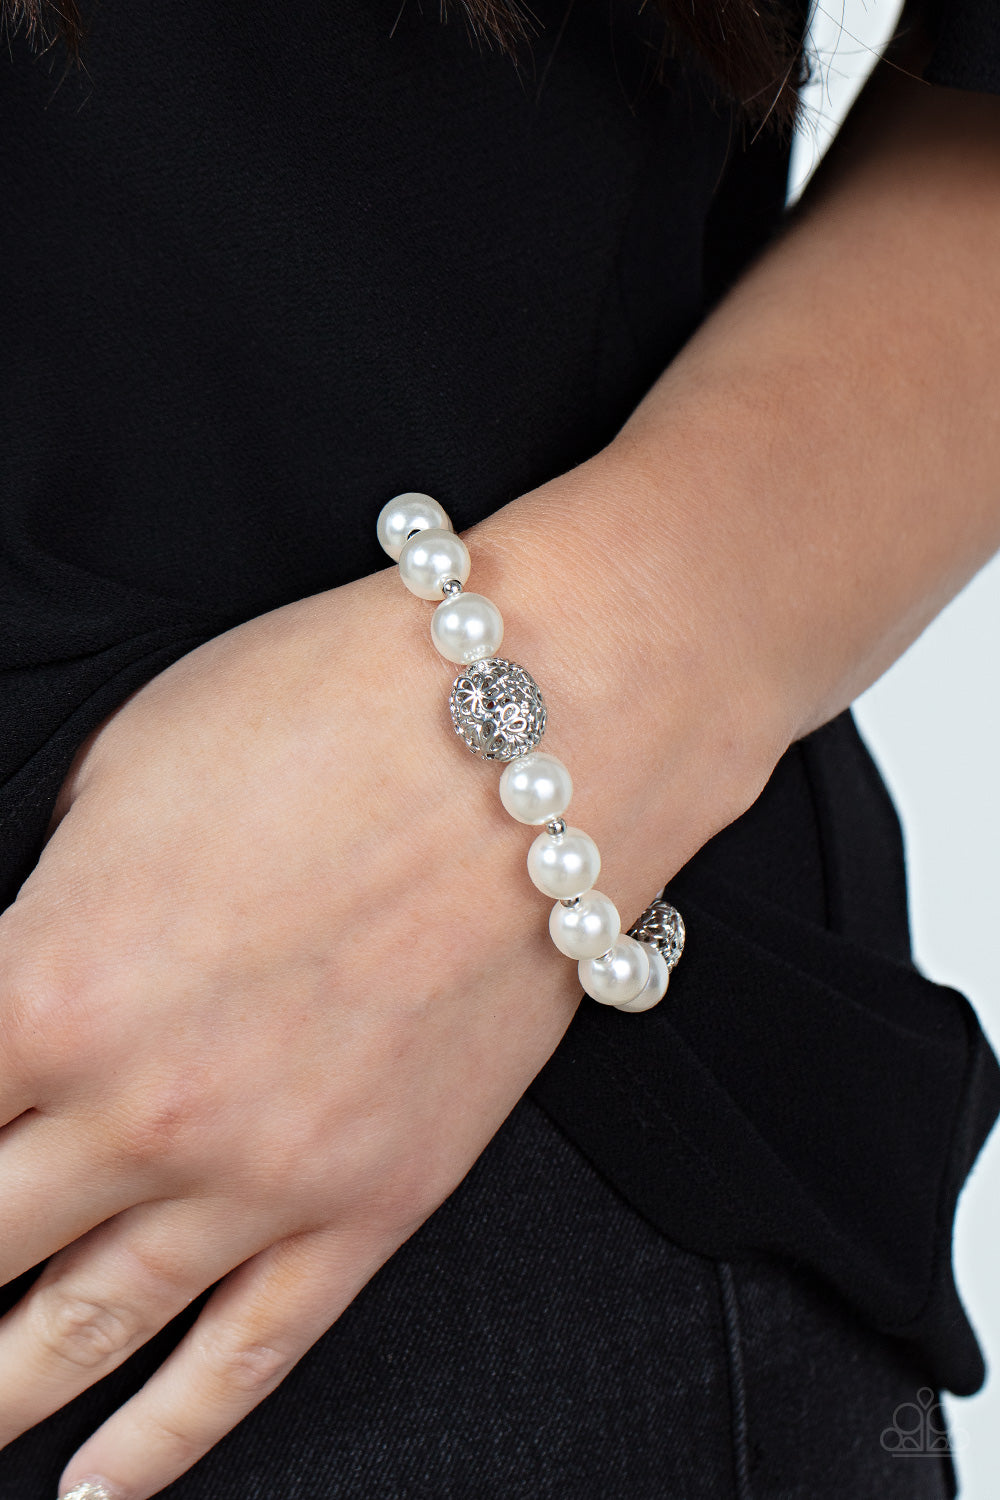 Crystal Charisma - White Bracelet - Chic Jewelry Boutique